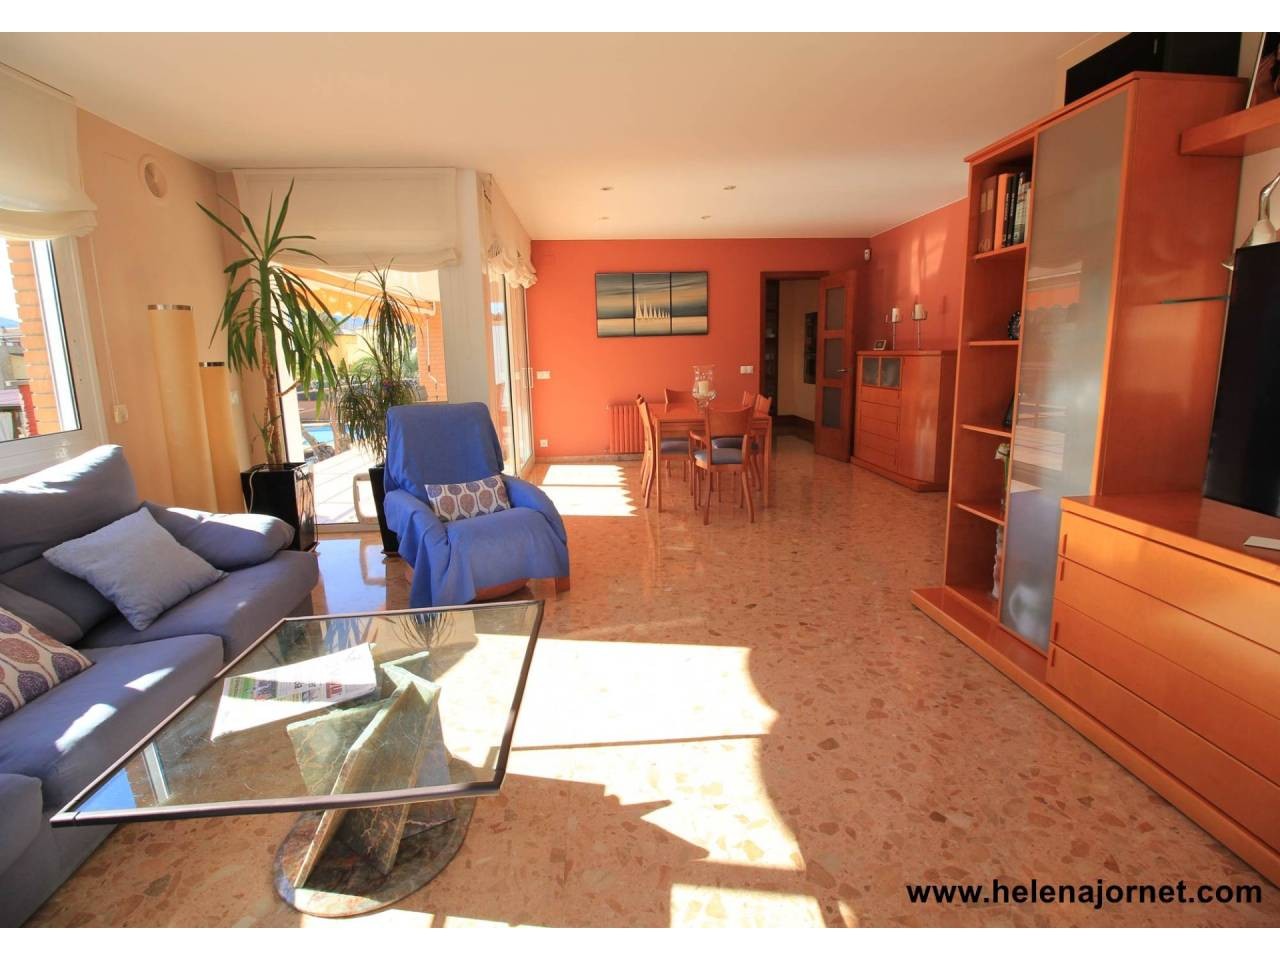 House for sale in Castell d'Aro - 1475